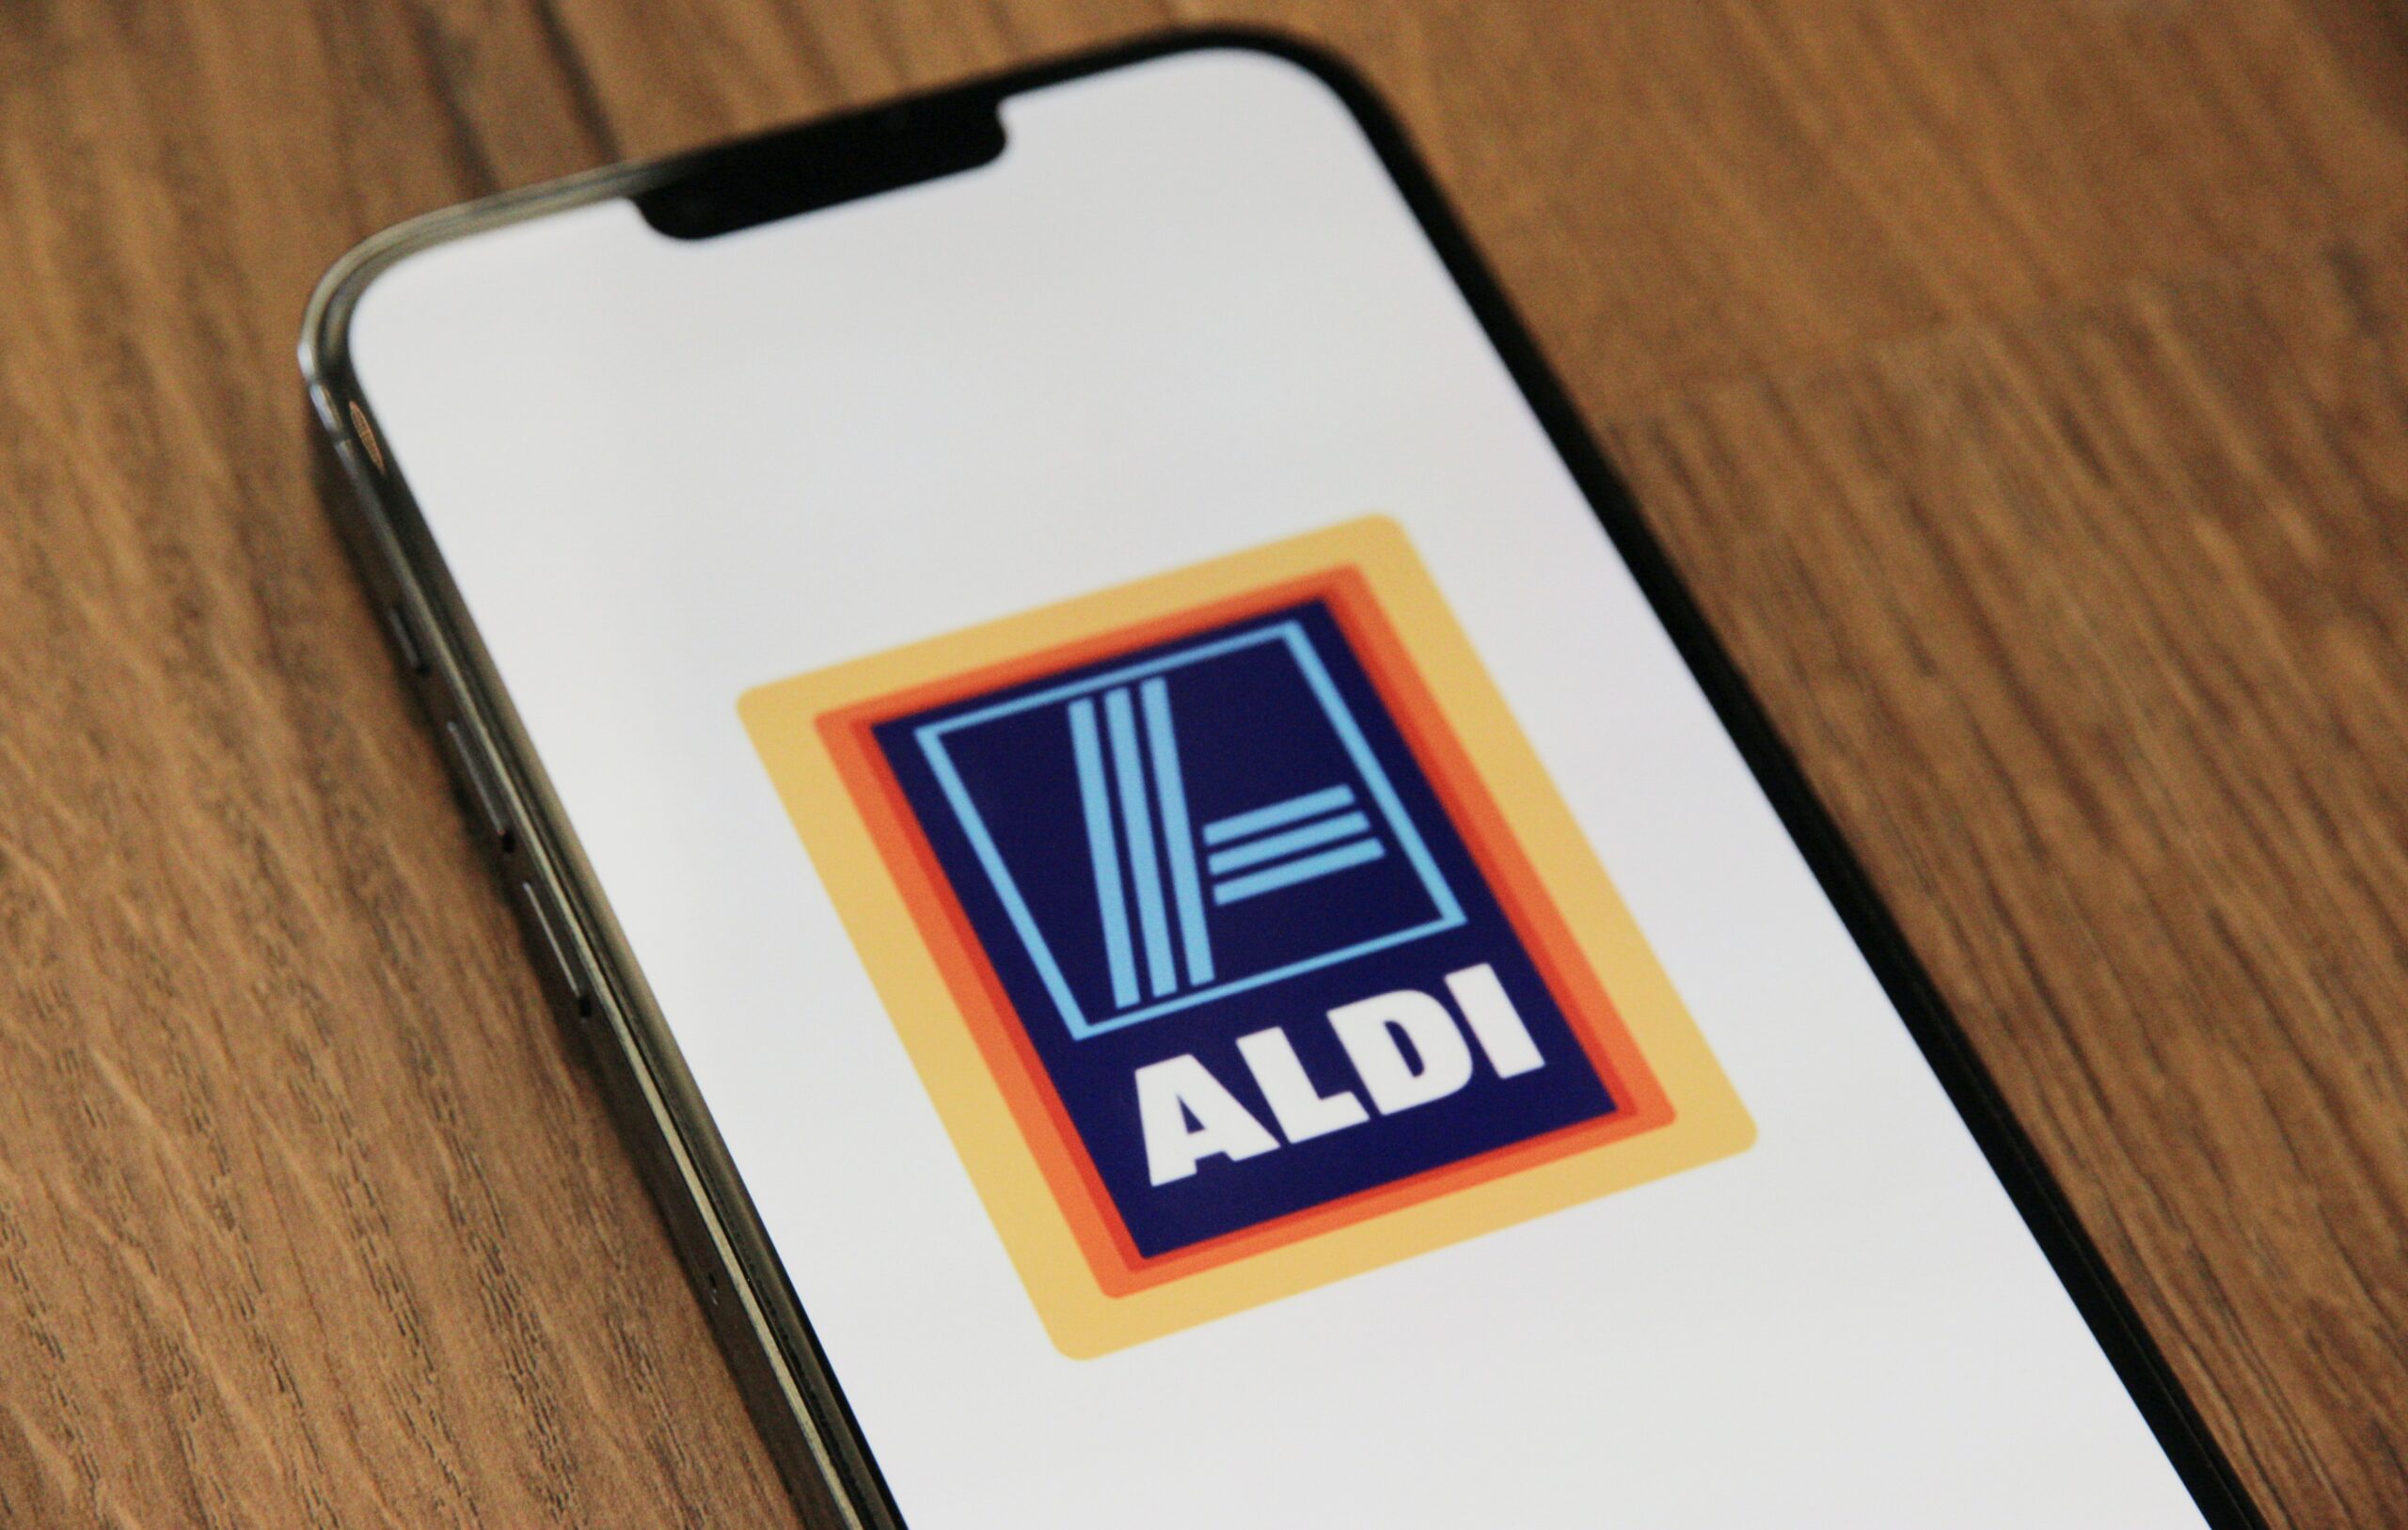 Aldi focuses on click and collect as it stops home delivery of Specialbuys and alcohol